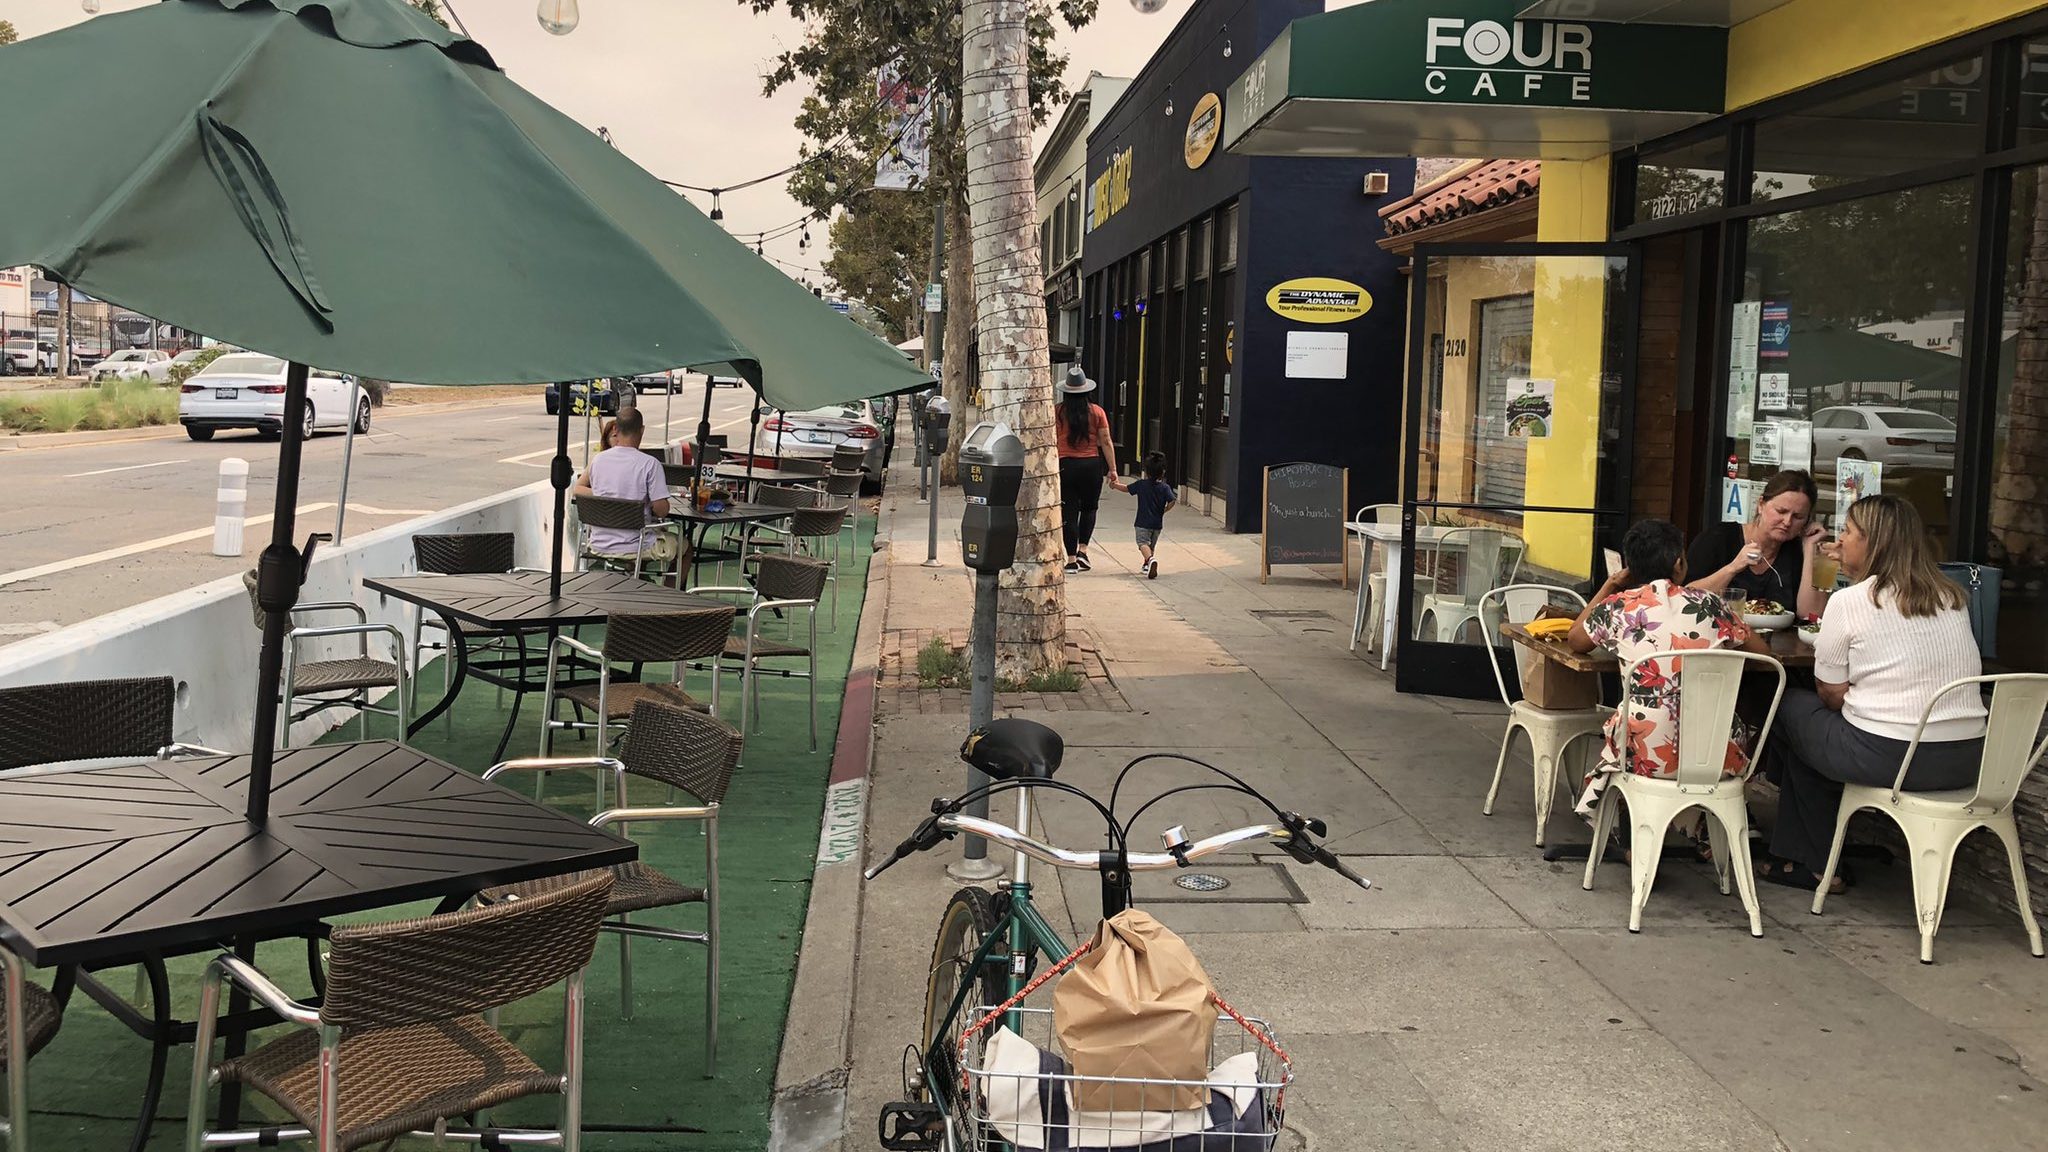 Narrow sidewalks, high speed limits restrict L.A. outdoor dining